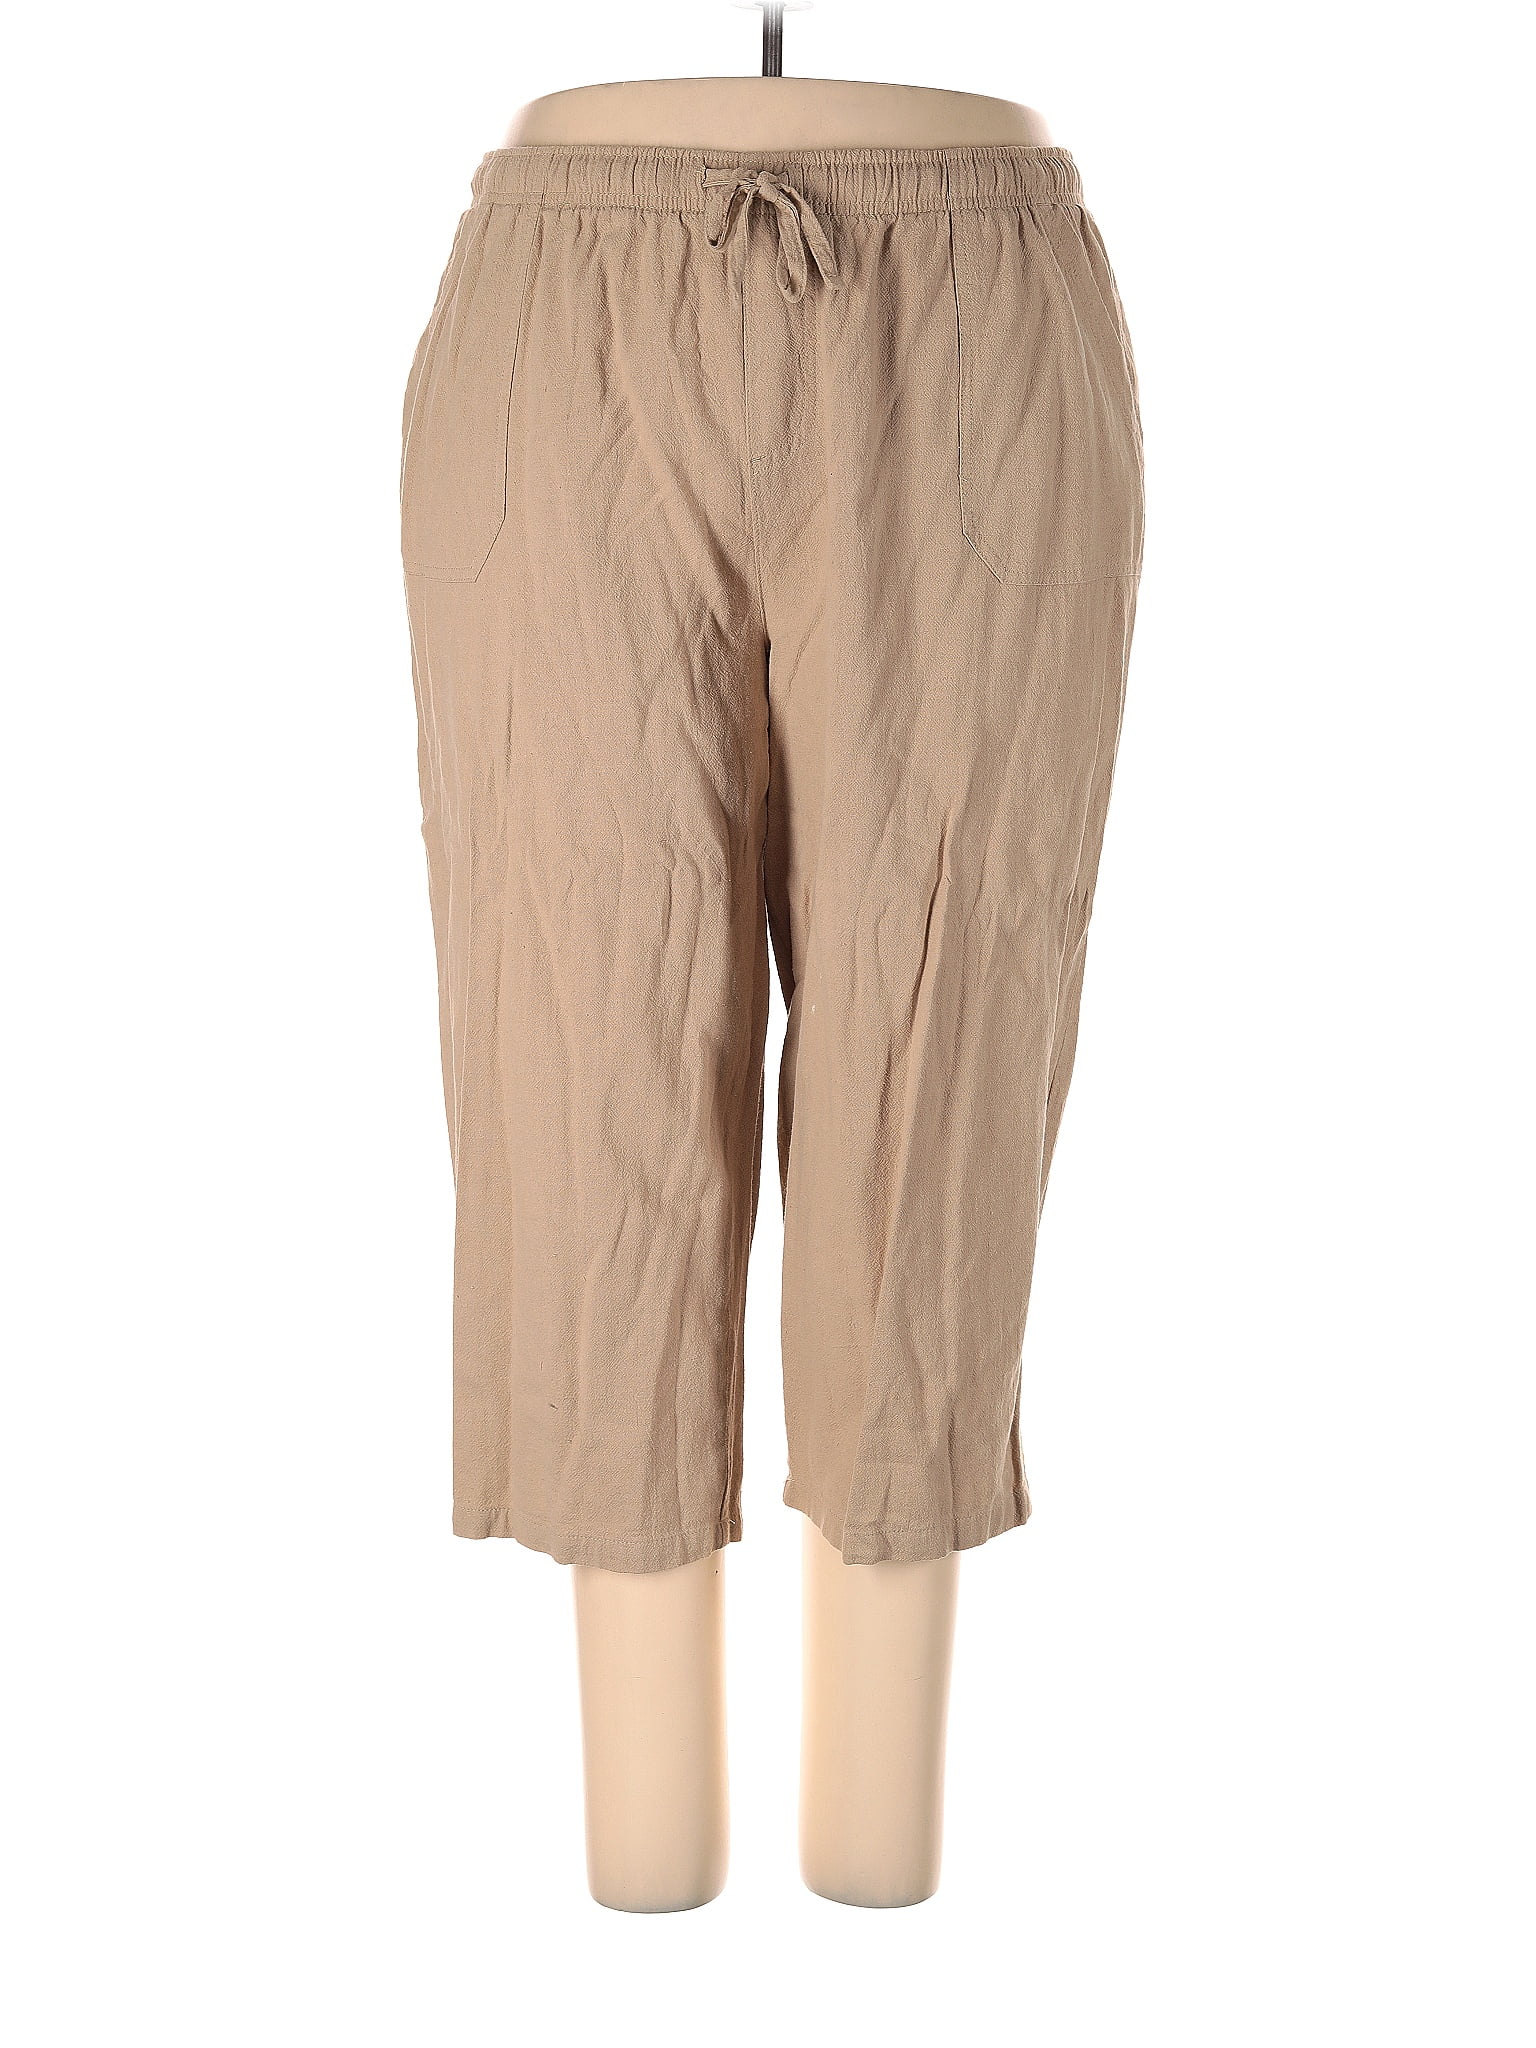 Faded Glory Brown Tan Casual Pants Size 1X (Plus) - 56% off